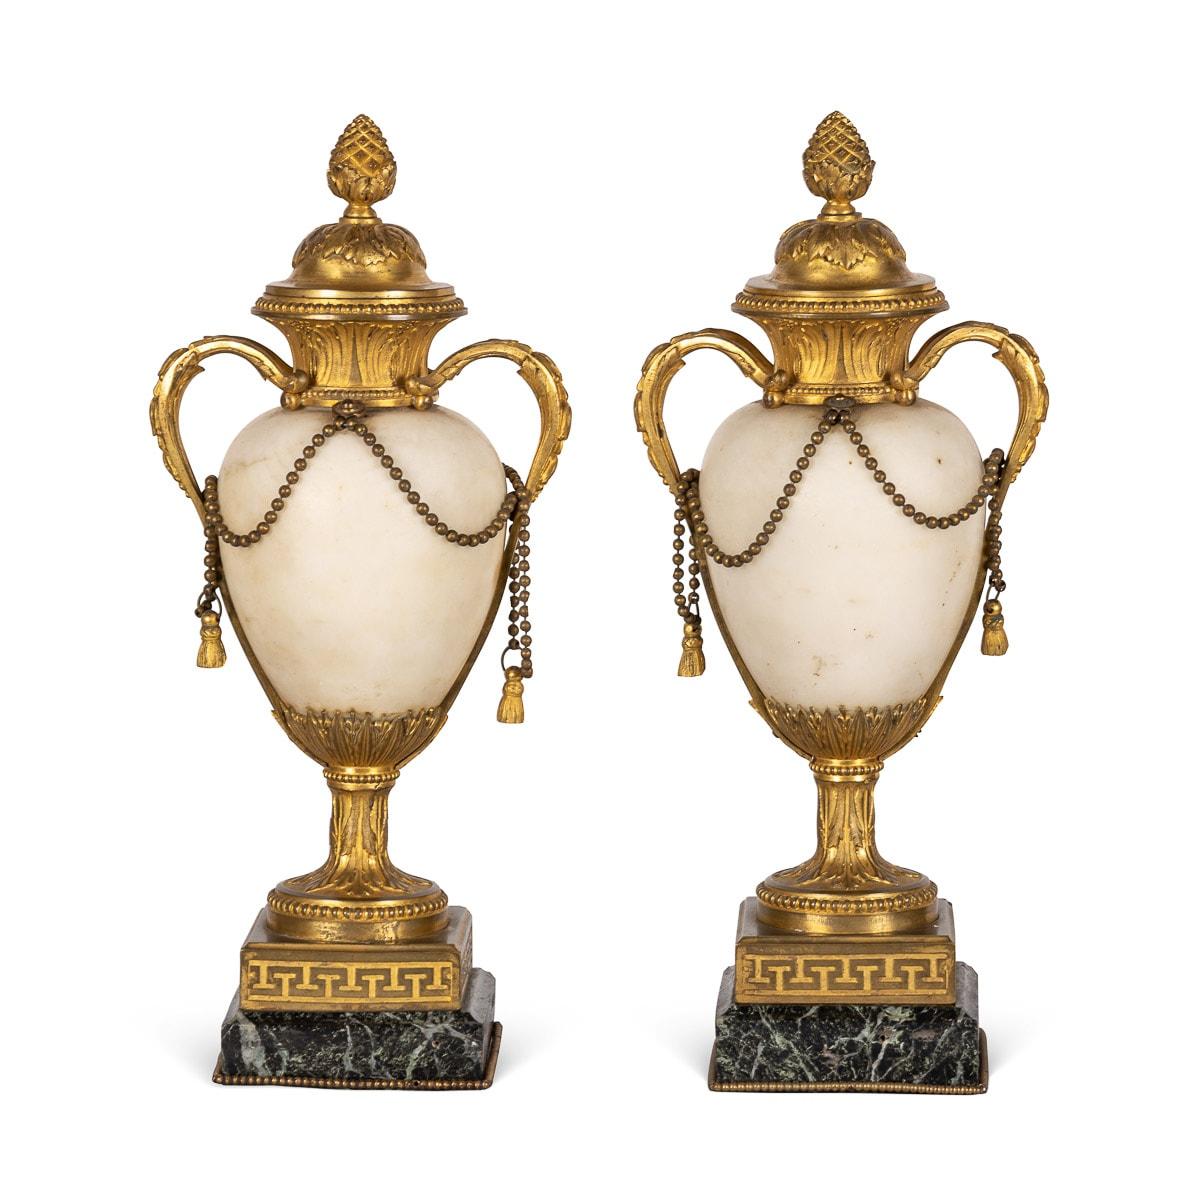 Antique Mid-19th century French Ormolu mounted on white marble urns on green marble bases.

CONDITION
In Great Condition - No Damage.

Size
Height: 36cm
Width: 15.5cm
Depth: 15.5cm.